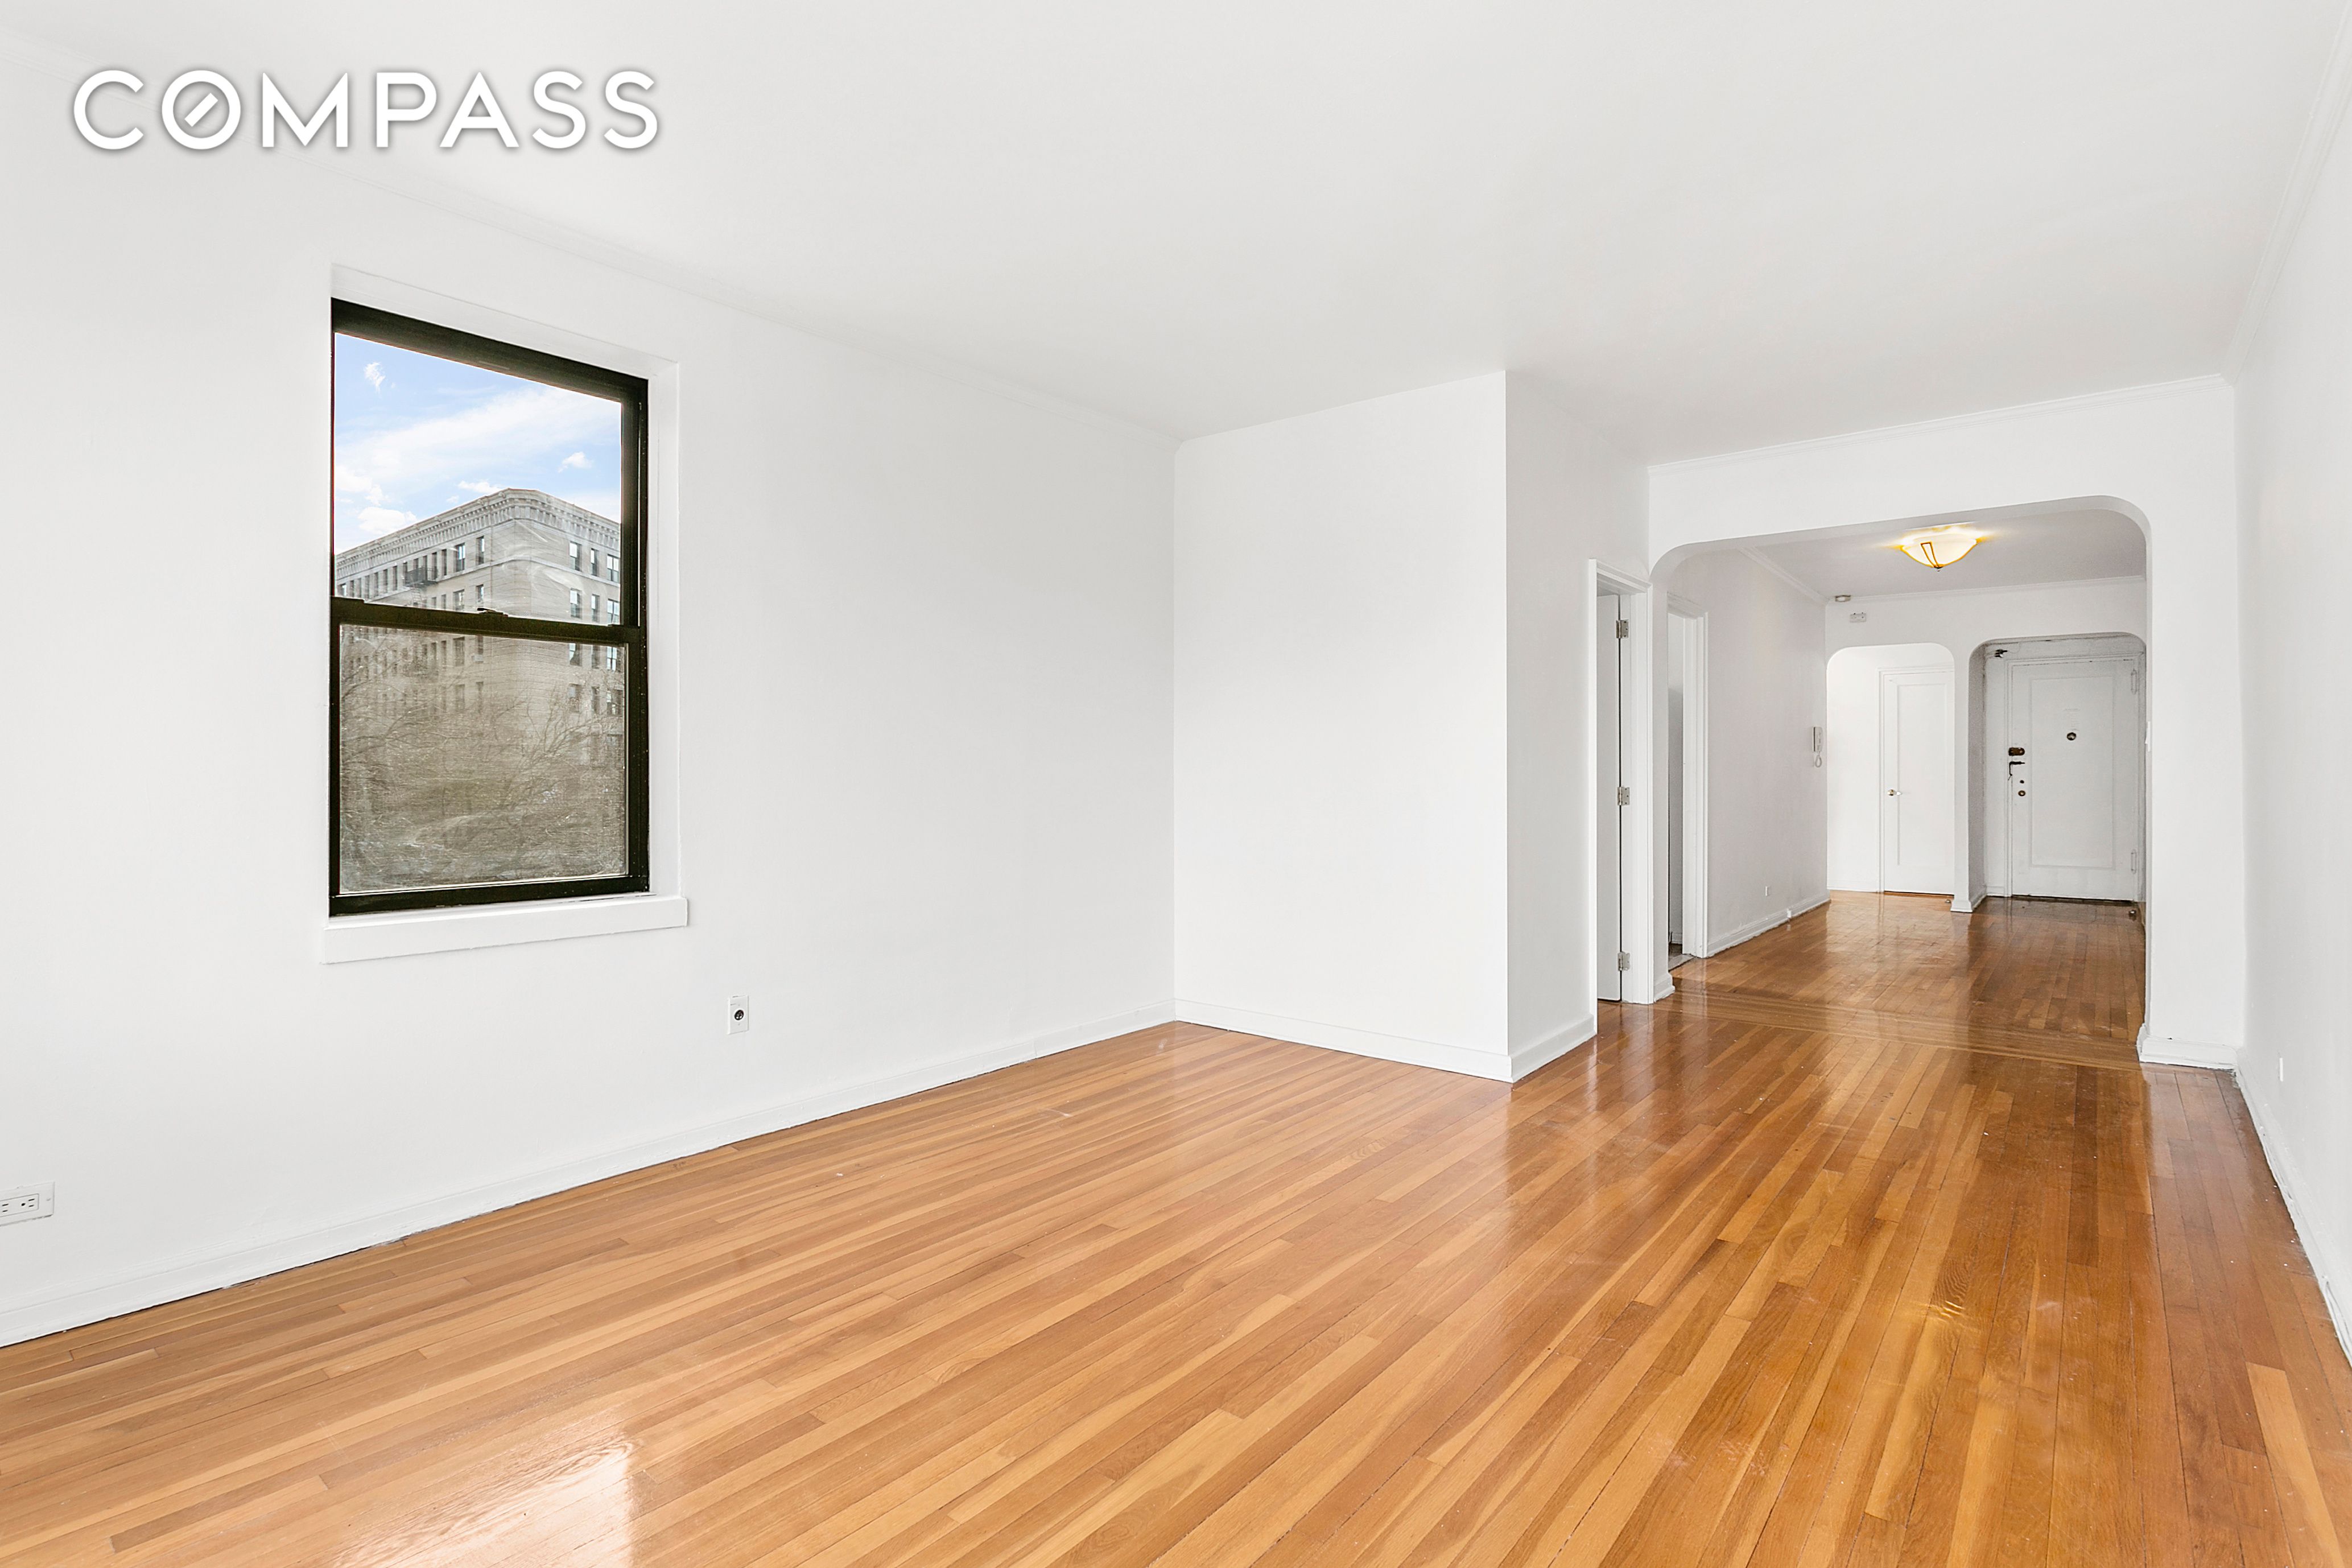 159-34 Riverside Drive West, New York City NY 10037 A.N Shell Realty